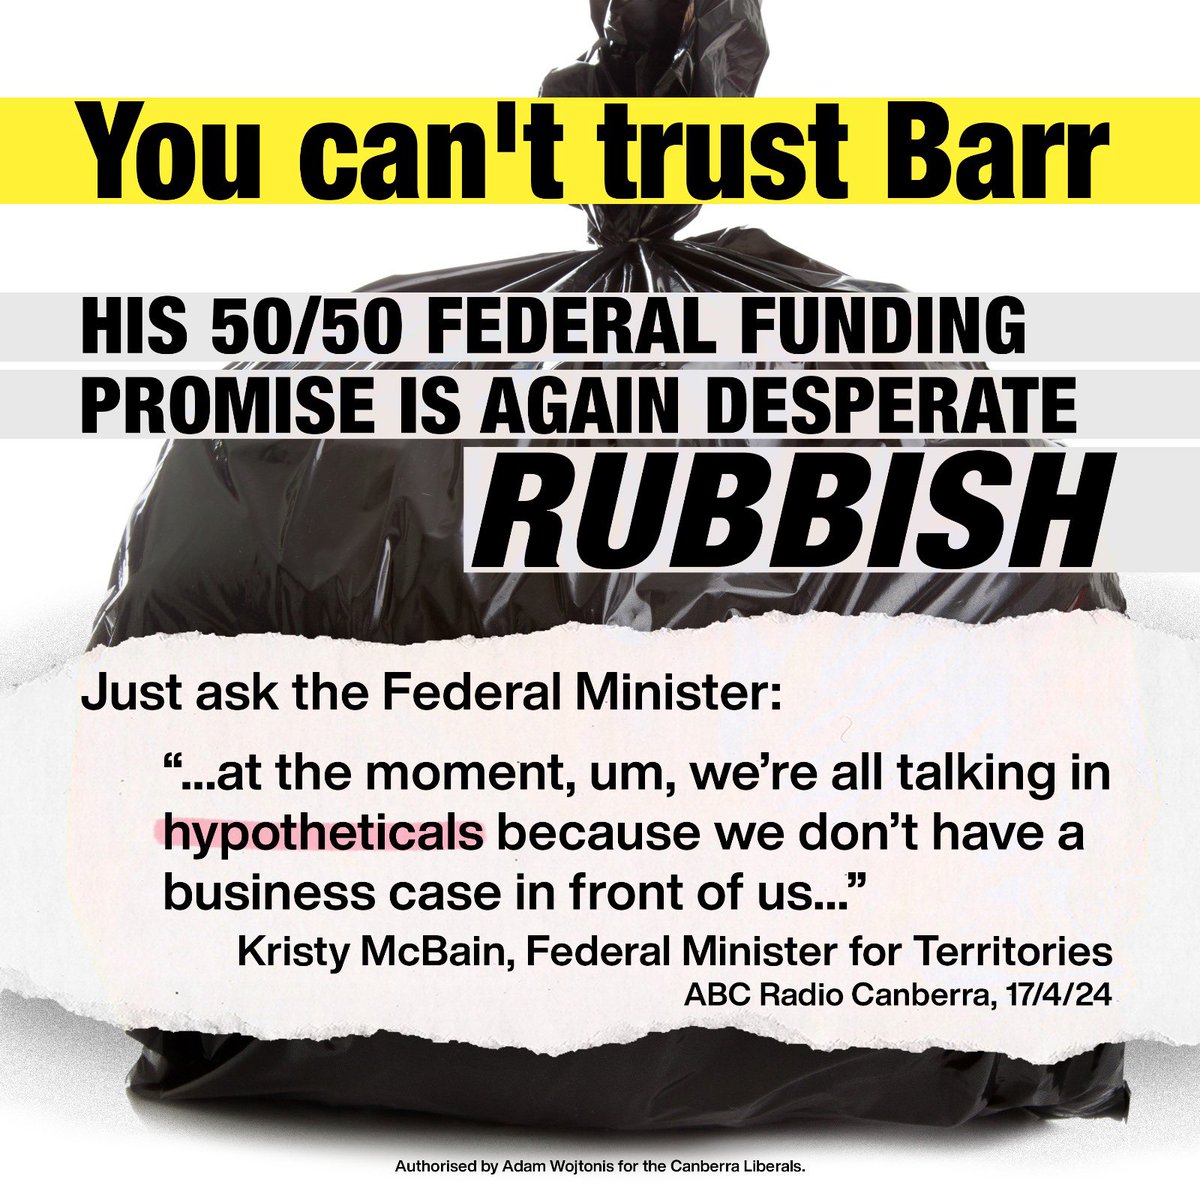 So Barr’s requested 50/50 funding from the feds for a convention and entertainment pavilion. What he failed to mention is that he’s not even provided a business case for it. This is just a desperate attempt to look like he’s doing something 6 months before an election.